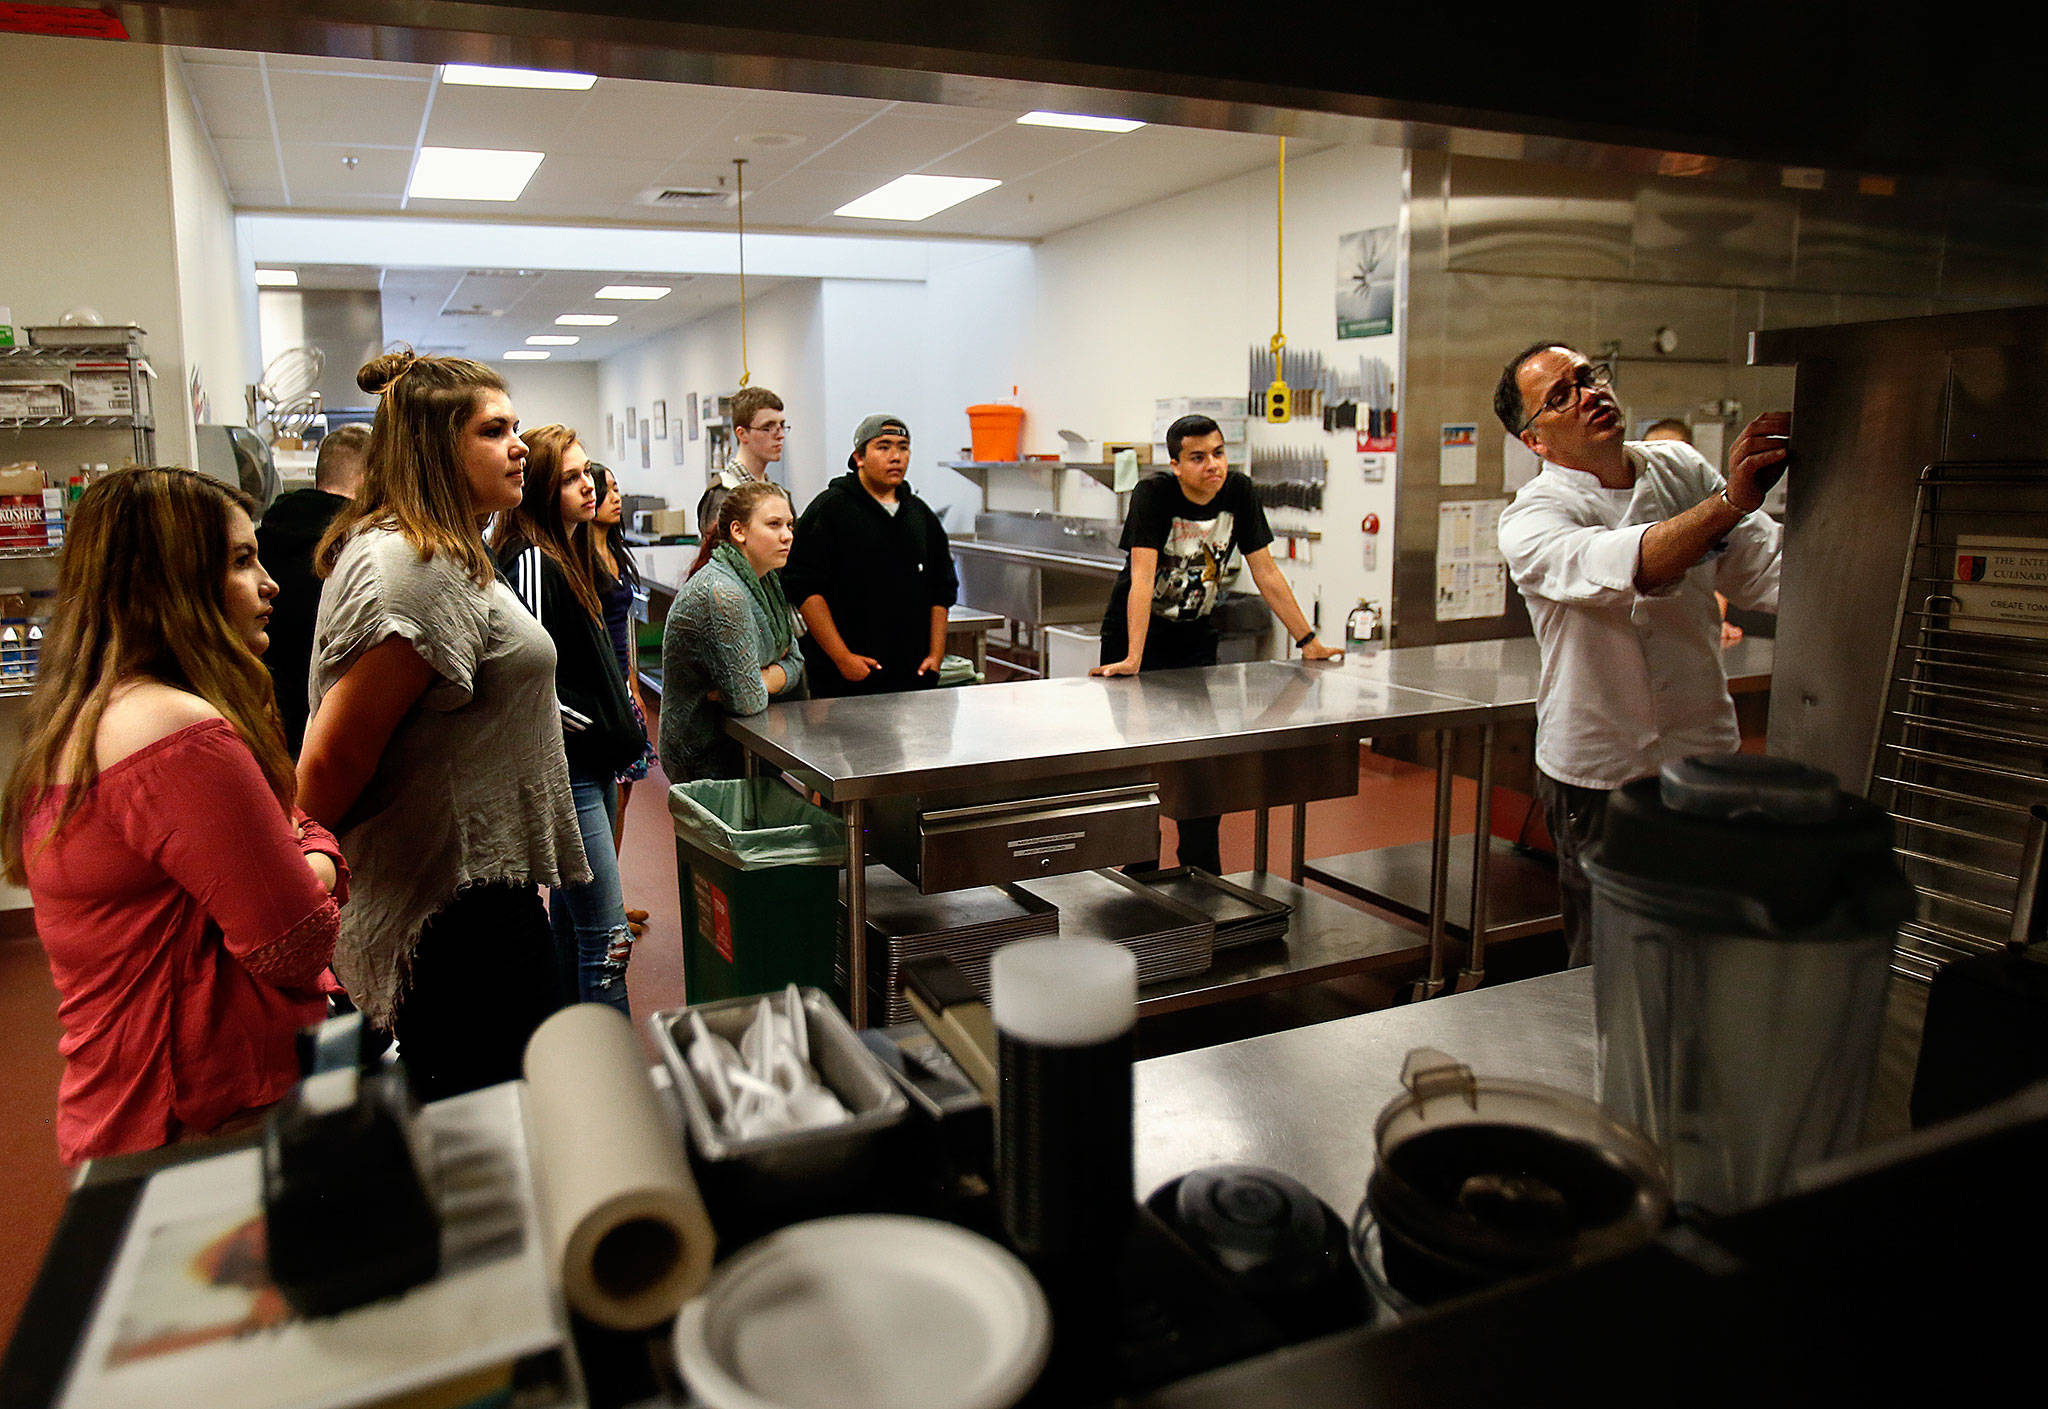 In culinary arts class at Sno-Isle Tech Center Wednesday, instructor John Pence introduces new students to unusually large kitchen appliances, including the ovens, one of which he demonstrates at right. (Dan Bates / The Herald)